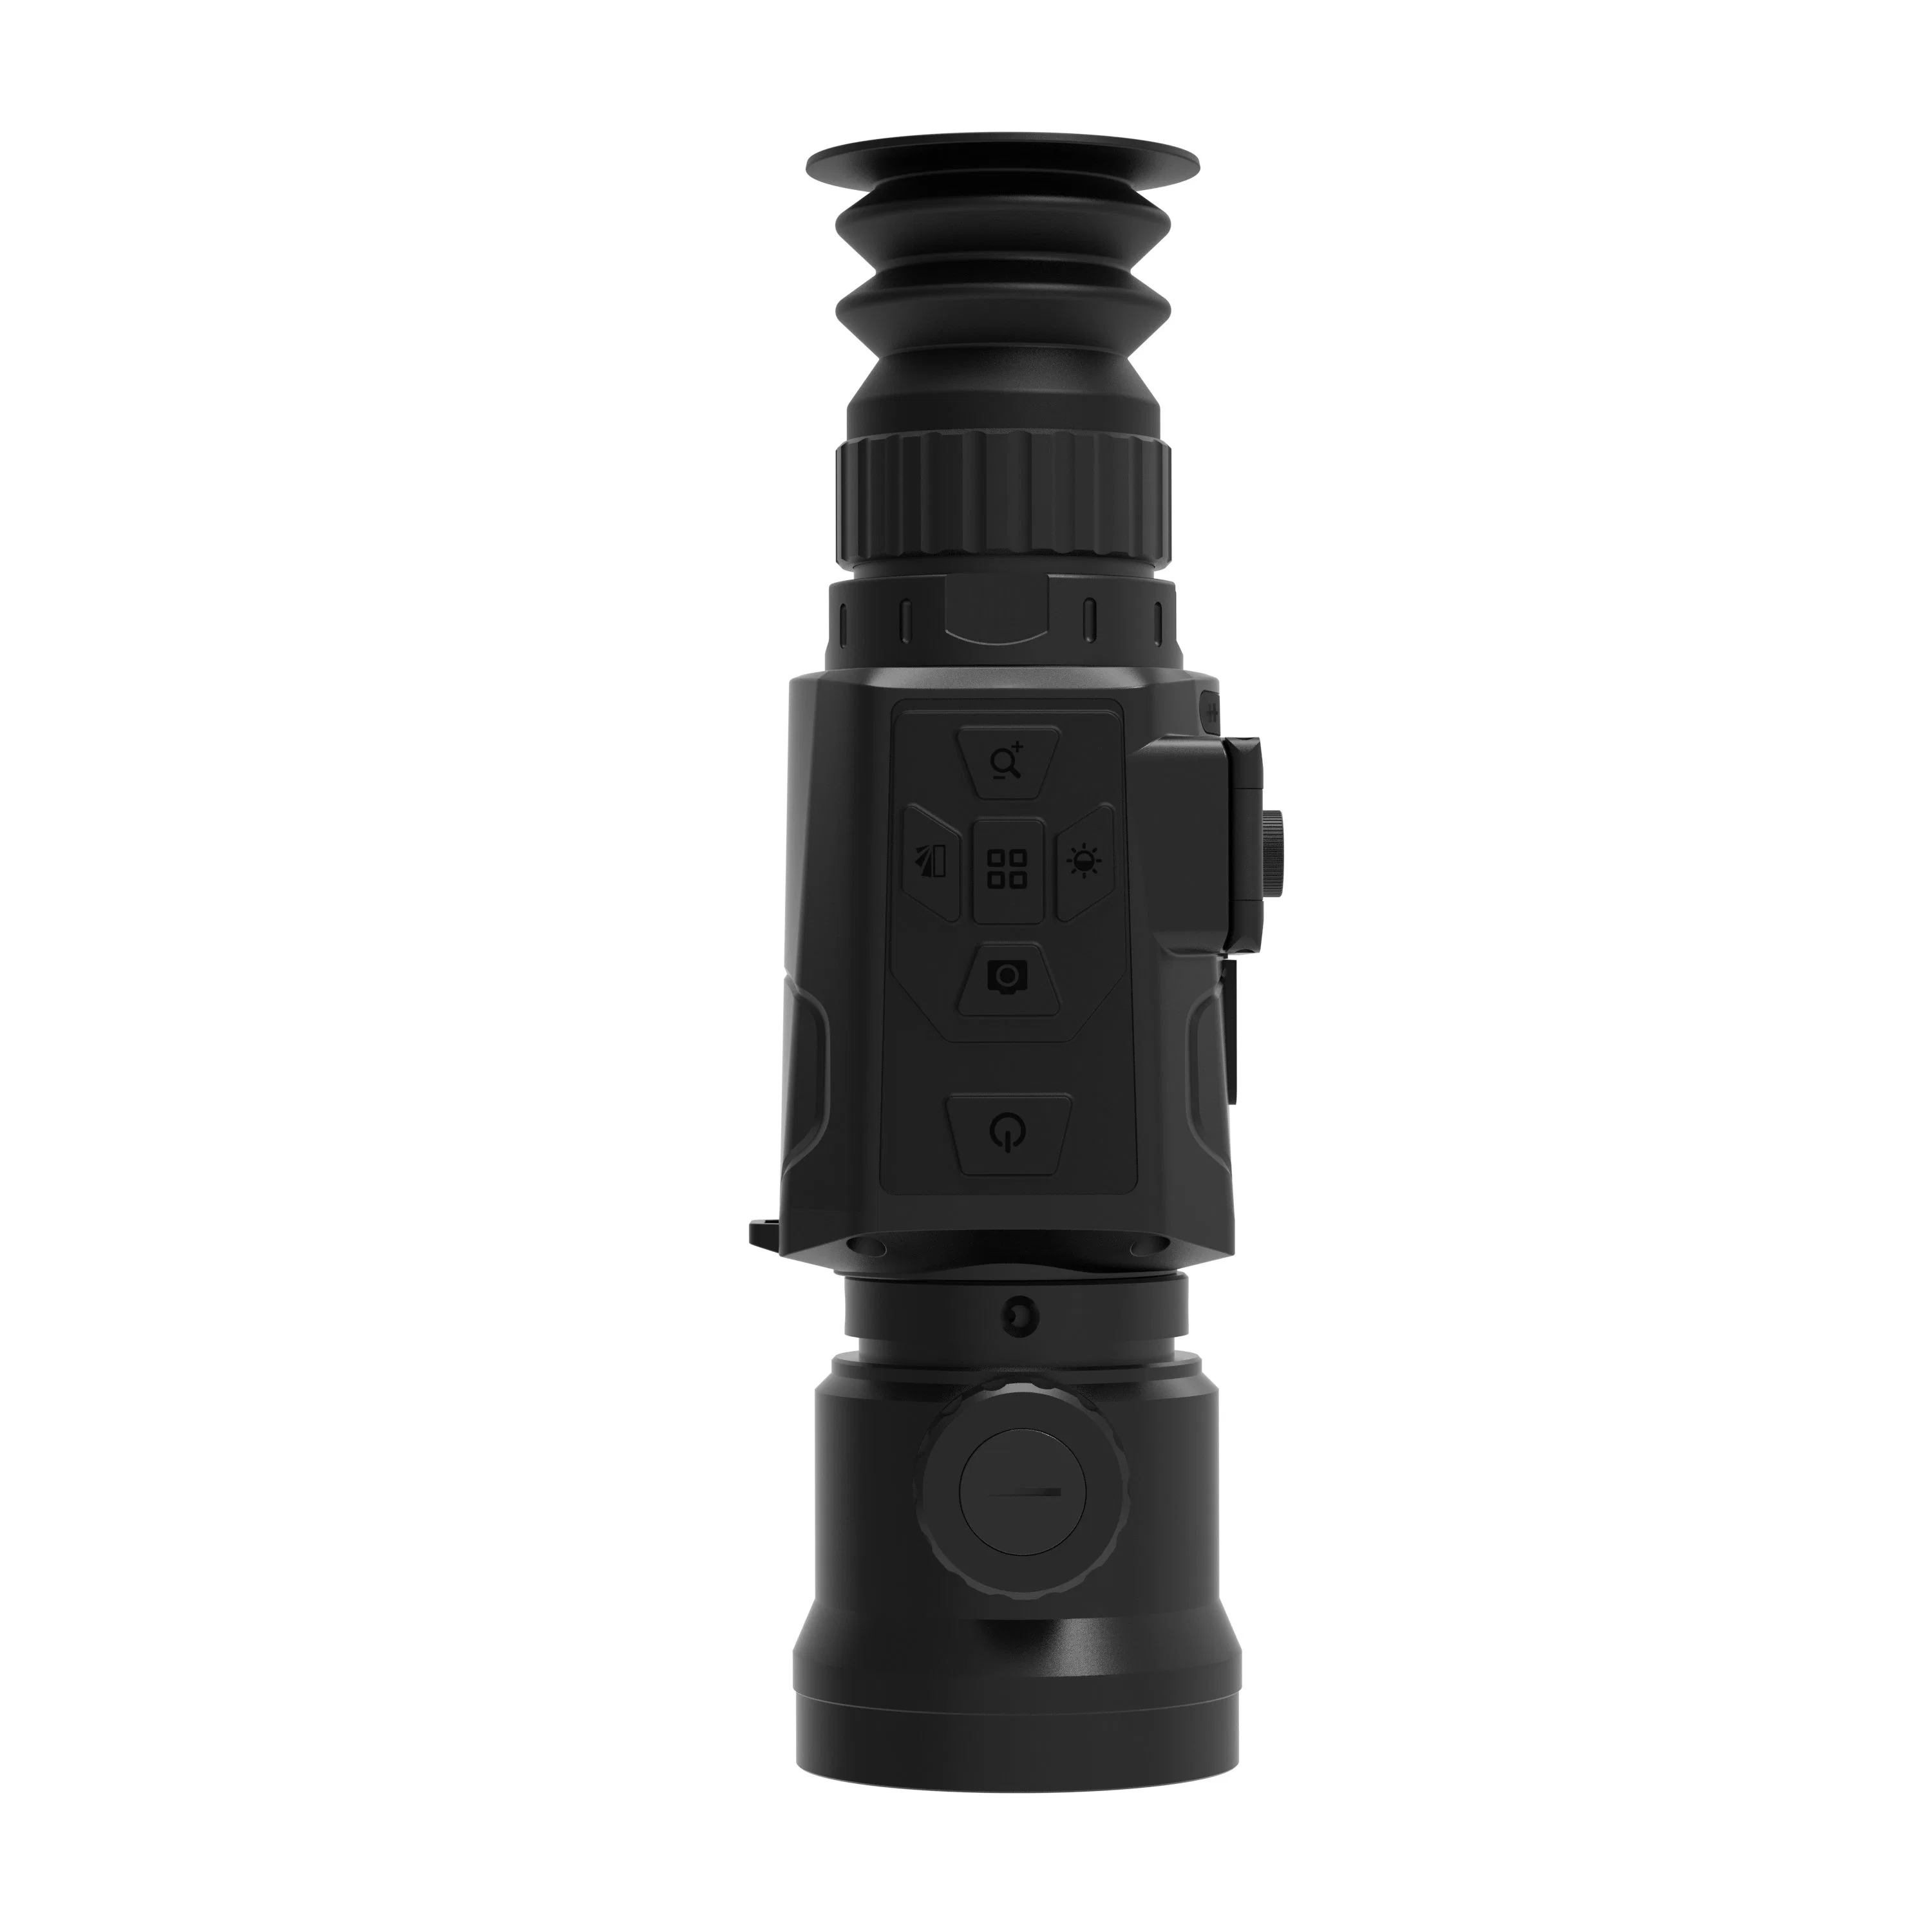 Jy-Sc19 Night Vision Thermal Imaging Sight Protection Level IP66